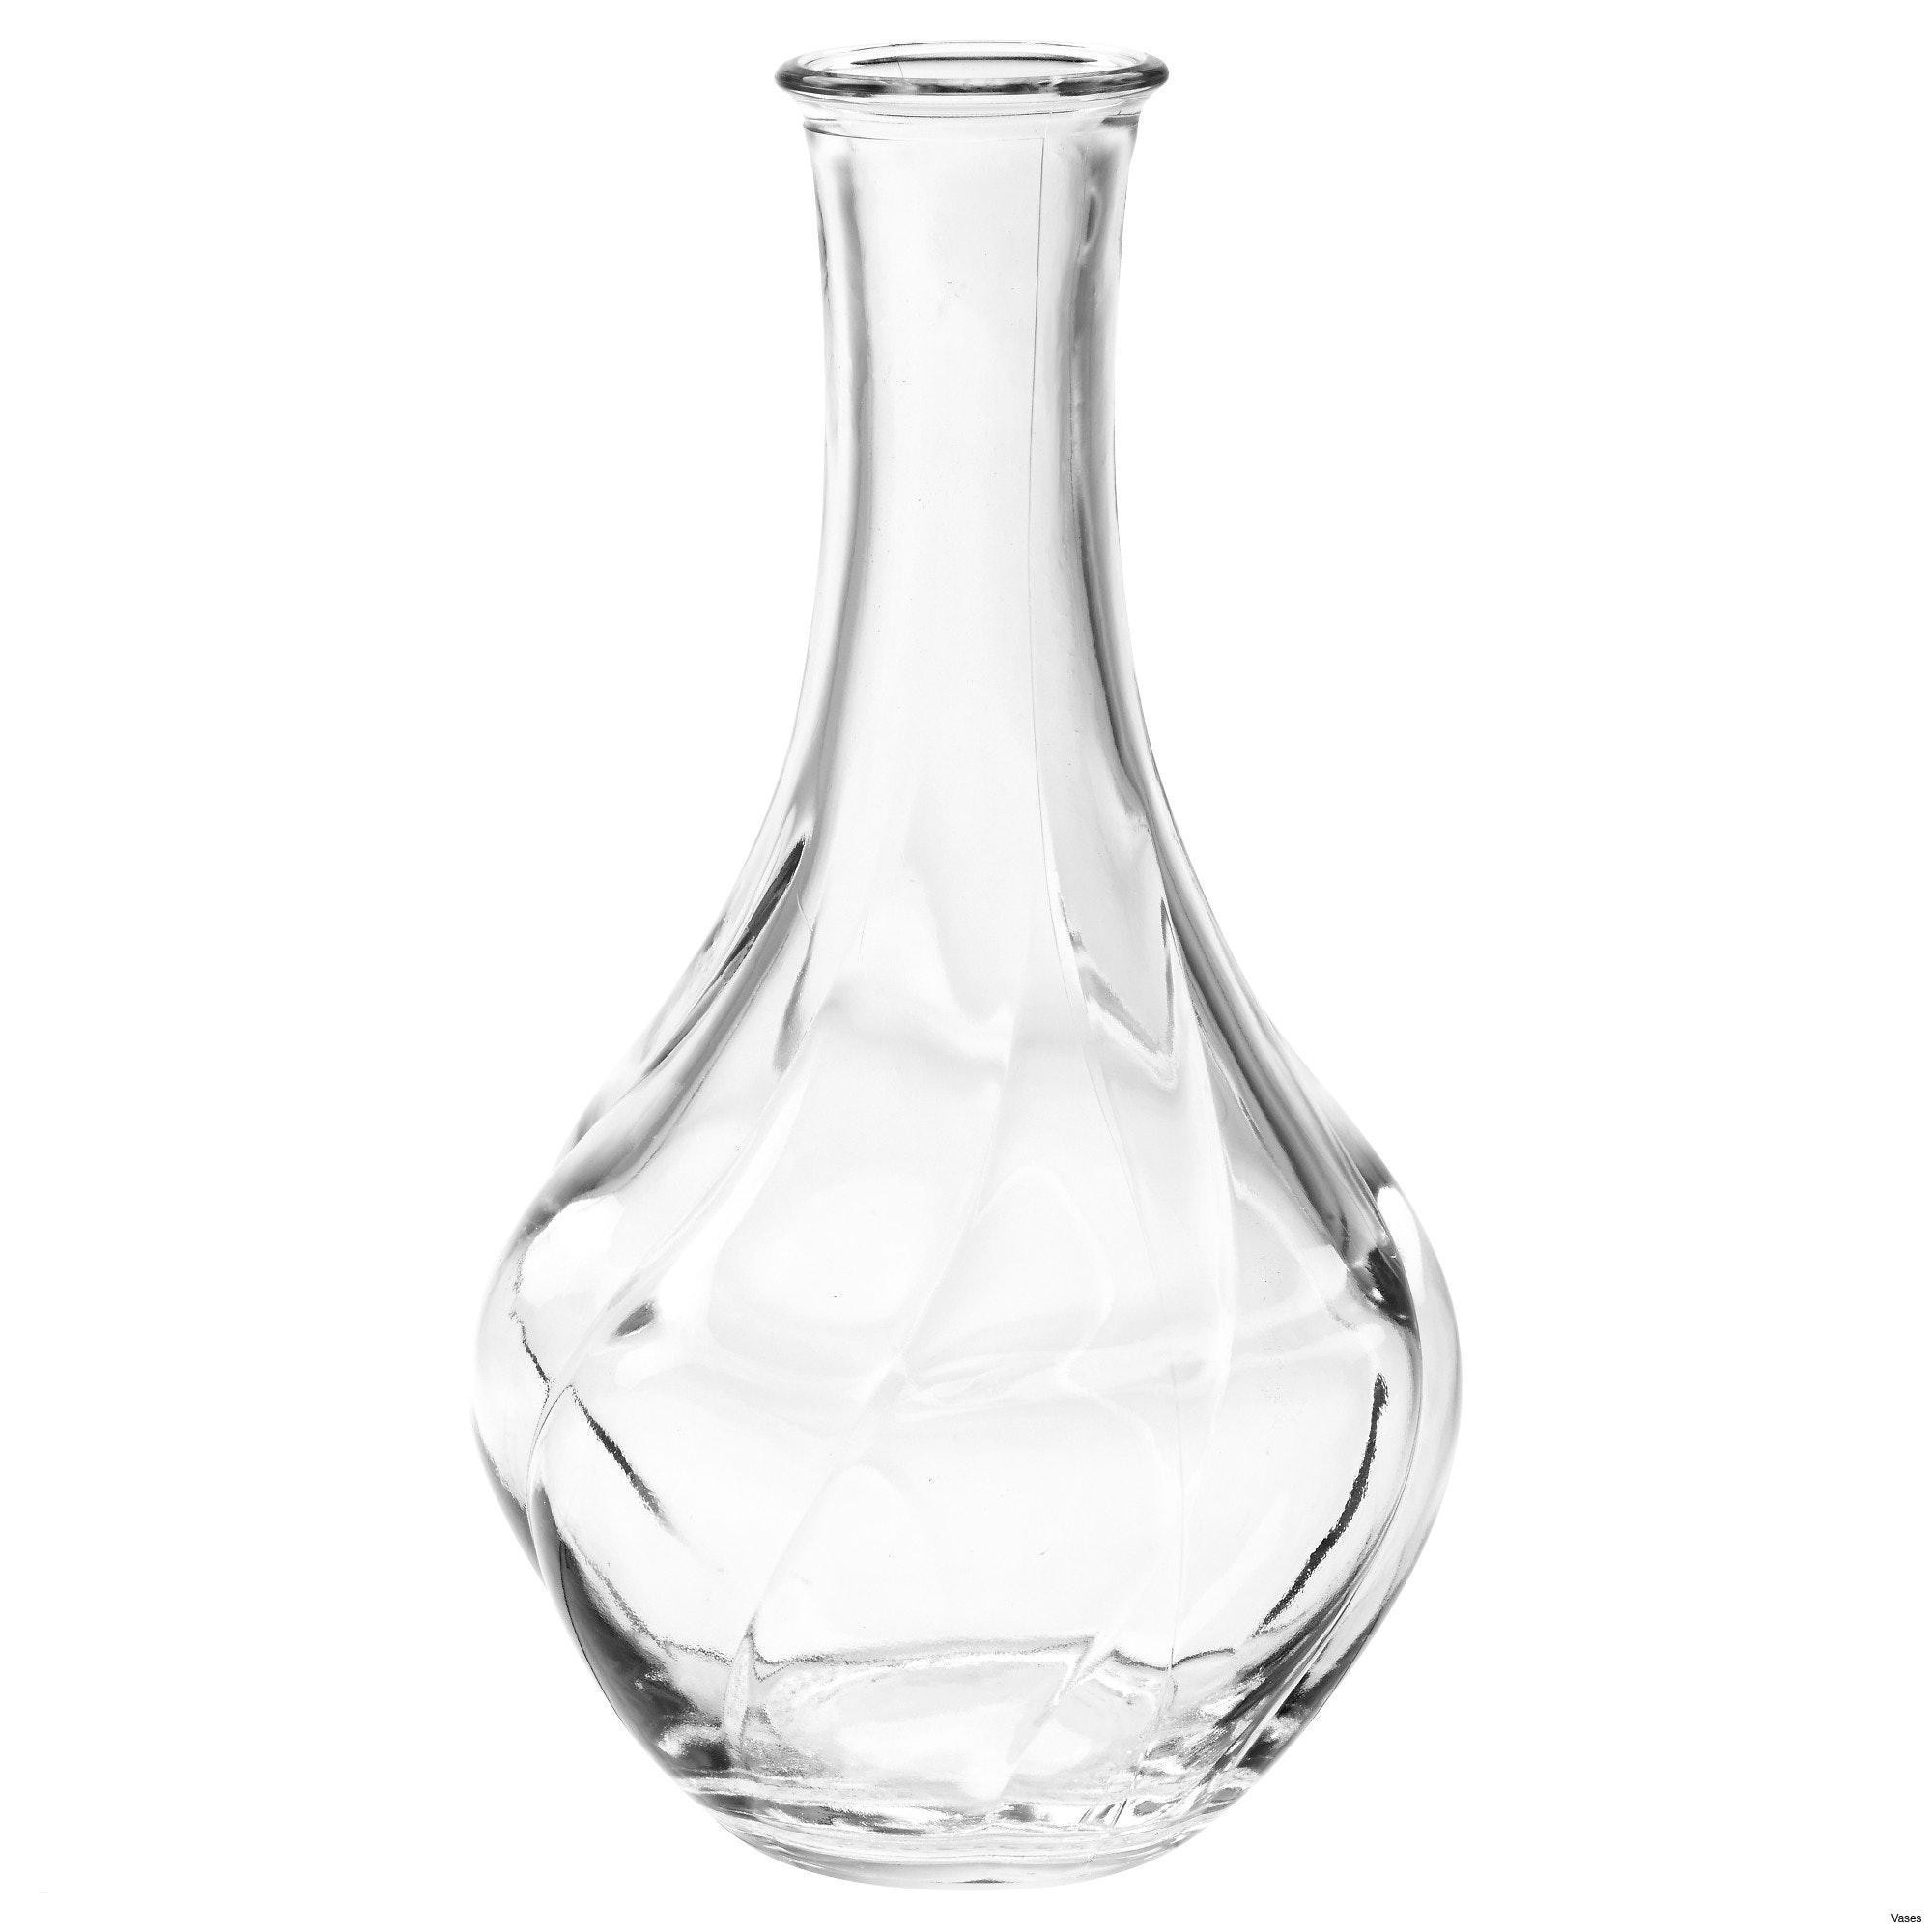 12 Stylish African Vases for Sale 2024 free download african vases for sale of white glass bowl image black and white living room cool living room with regard to black and white living room cool living room glass vases fresh